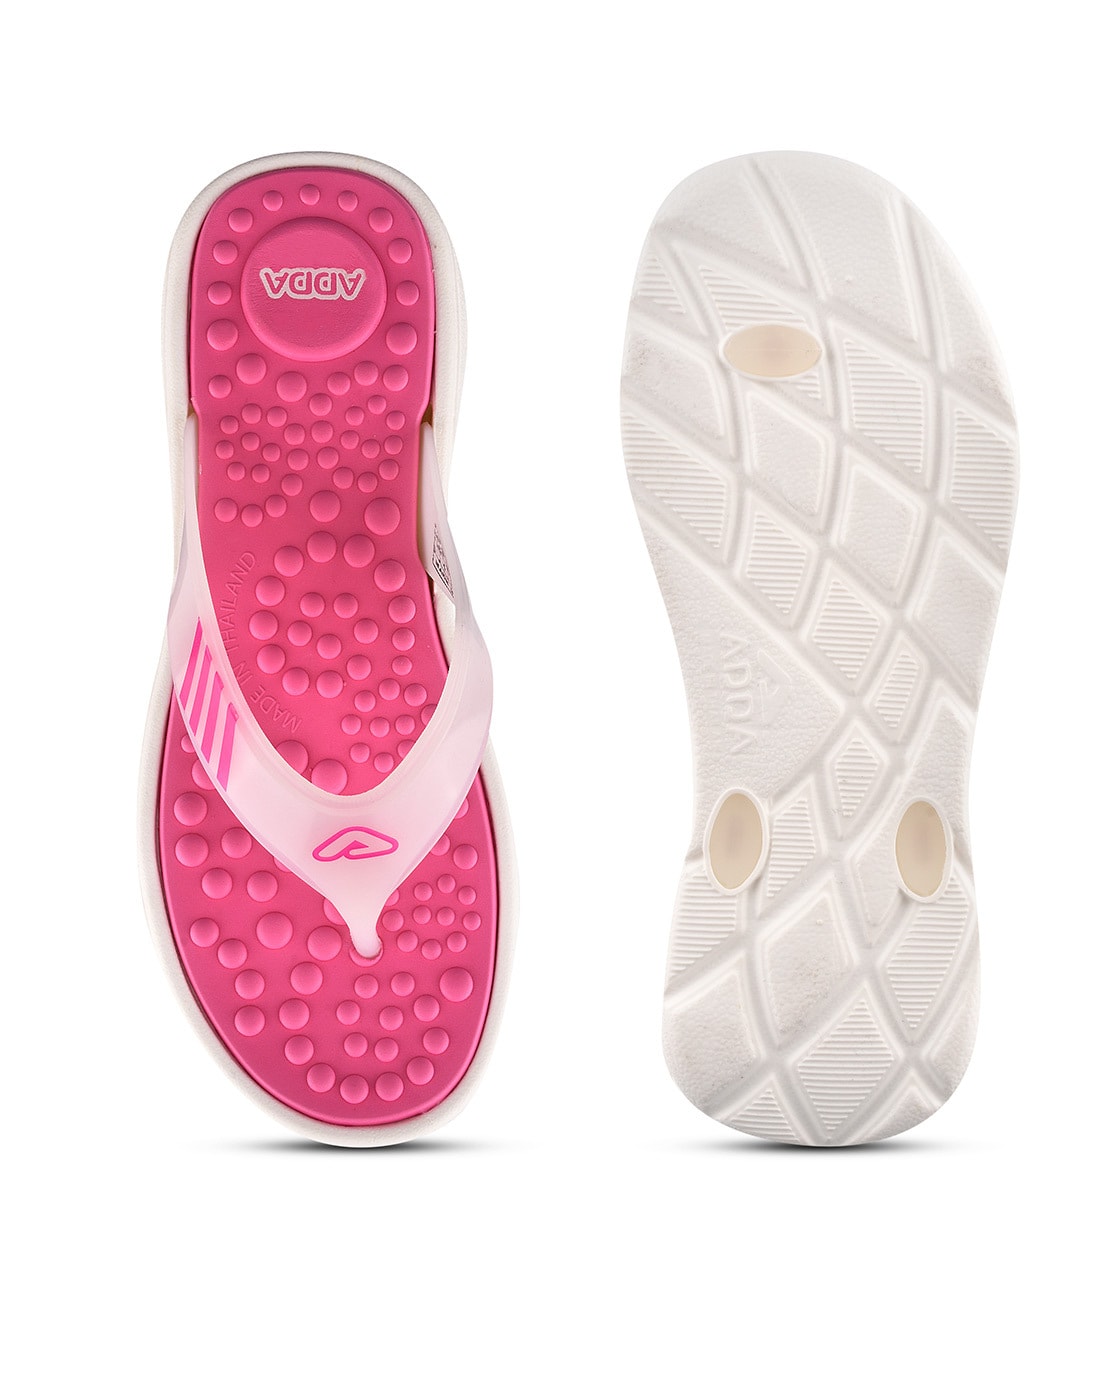 Buy Pink Flip Flop & Slippers for Women by ADDA Online